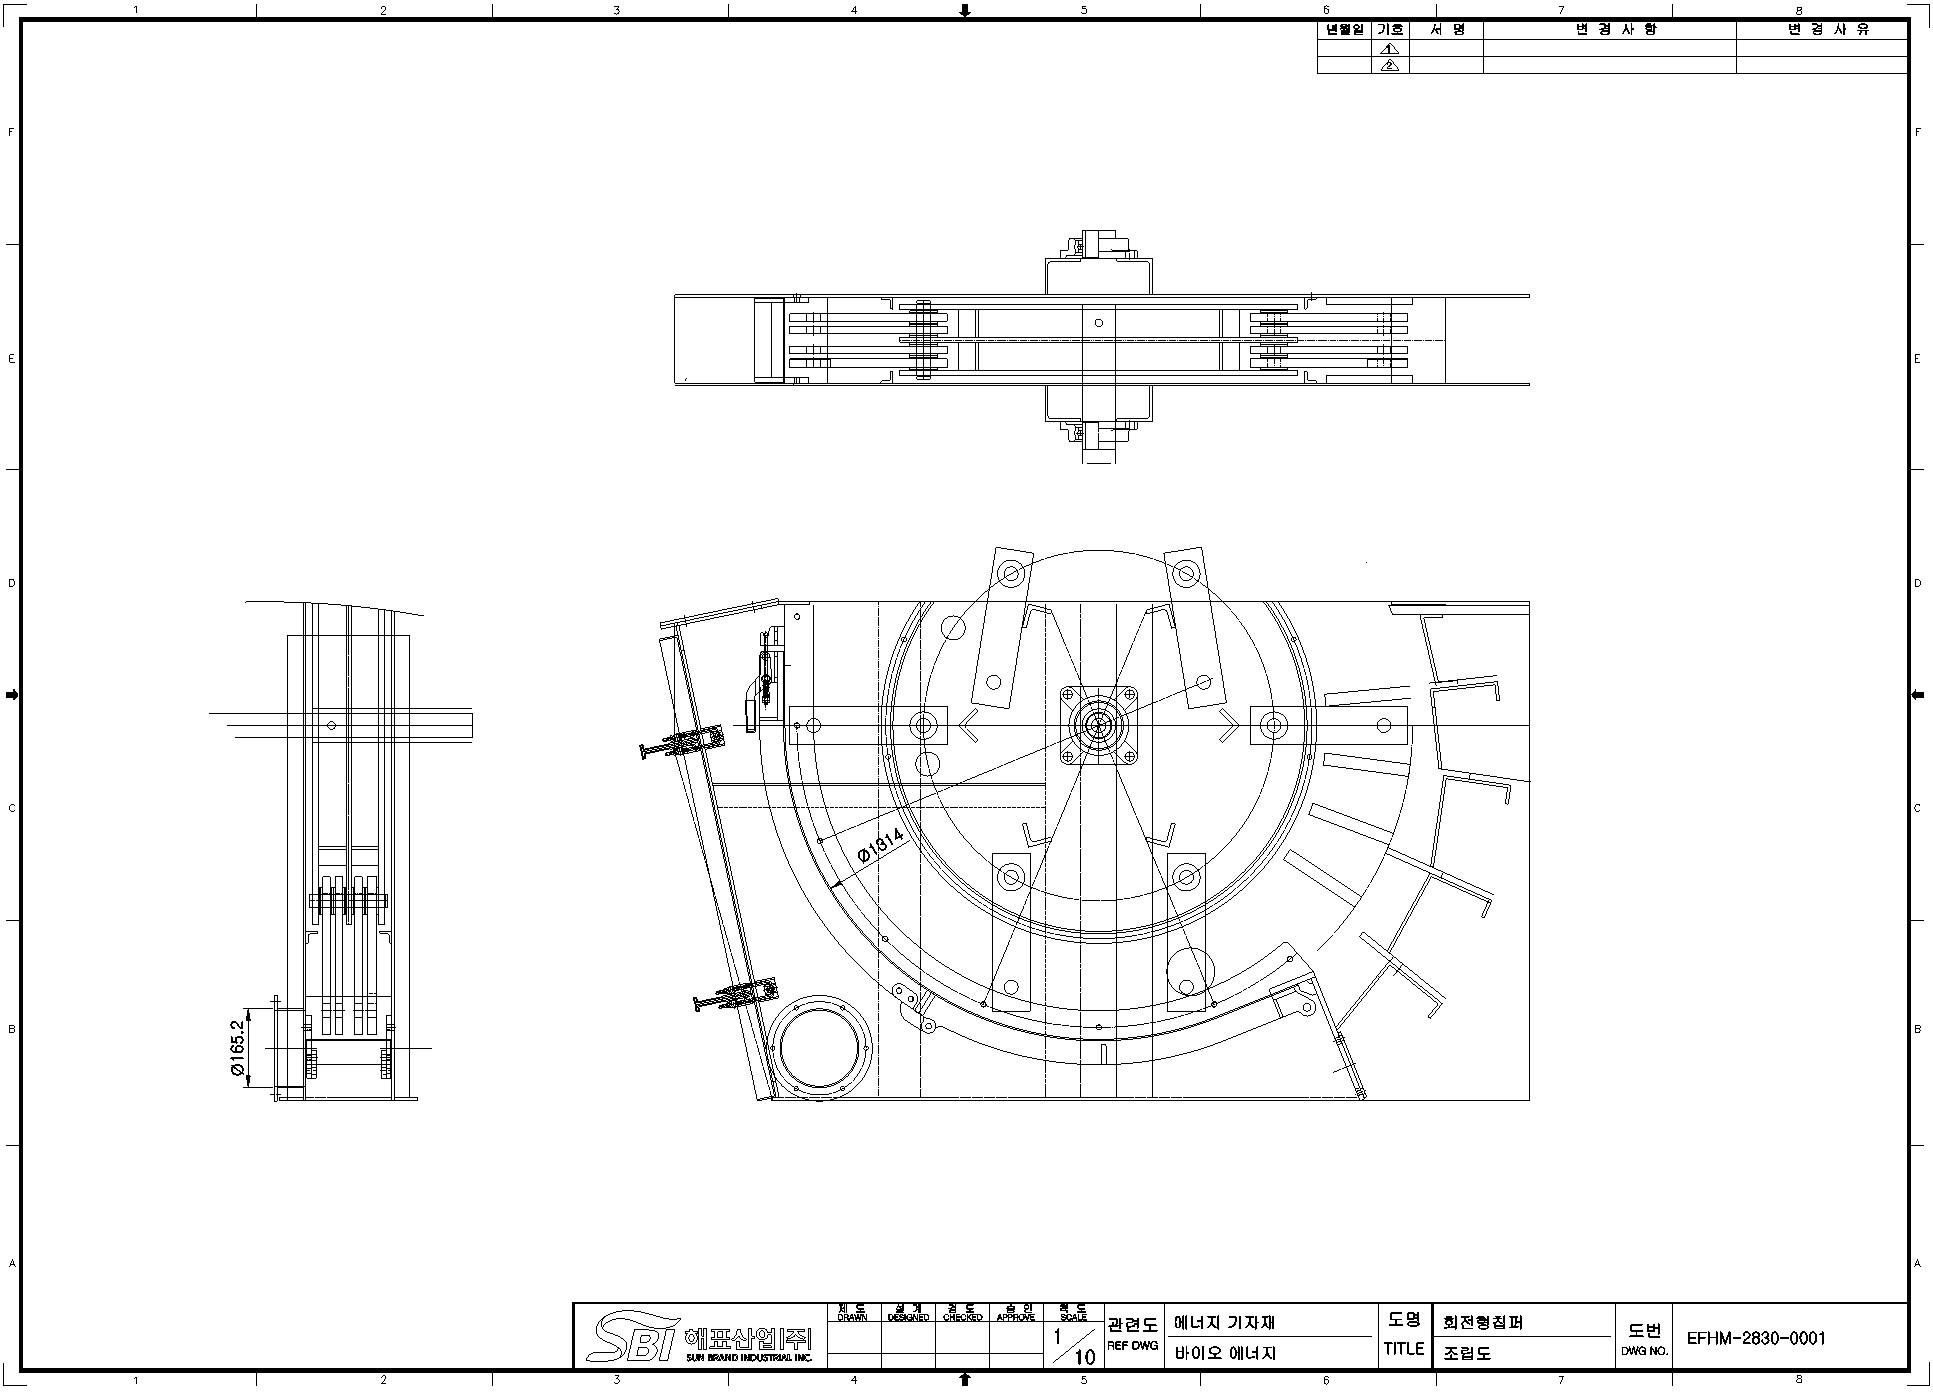 CAD for additional crushing machine for biomass chipper.